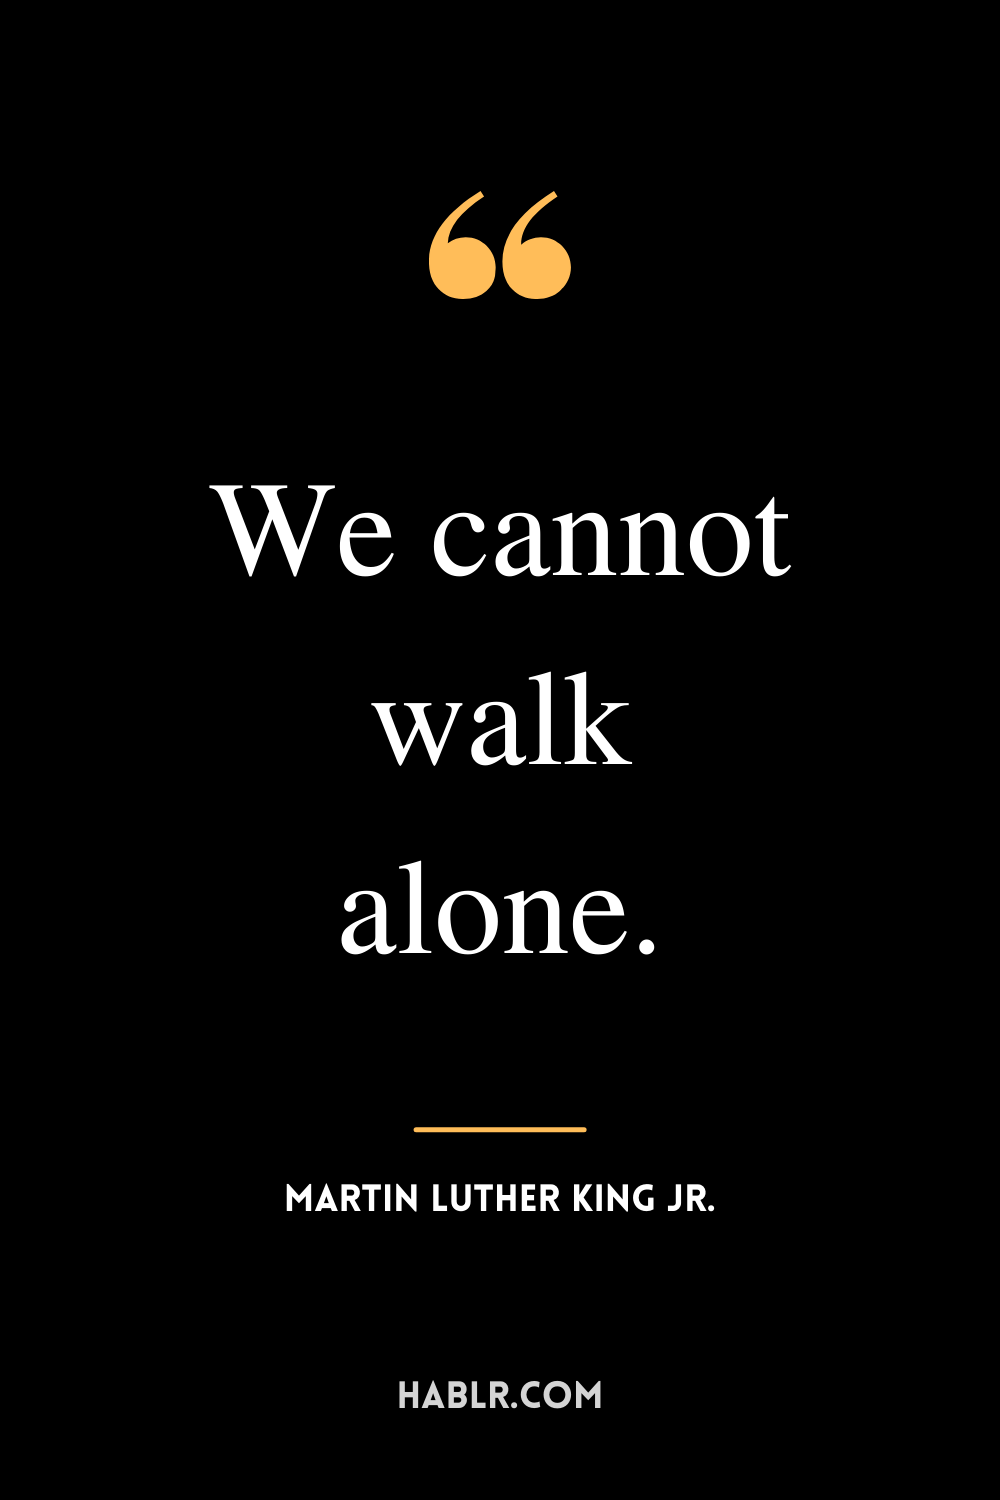 “We cannot walk alone.” -Martin Luther King Jr.